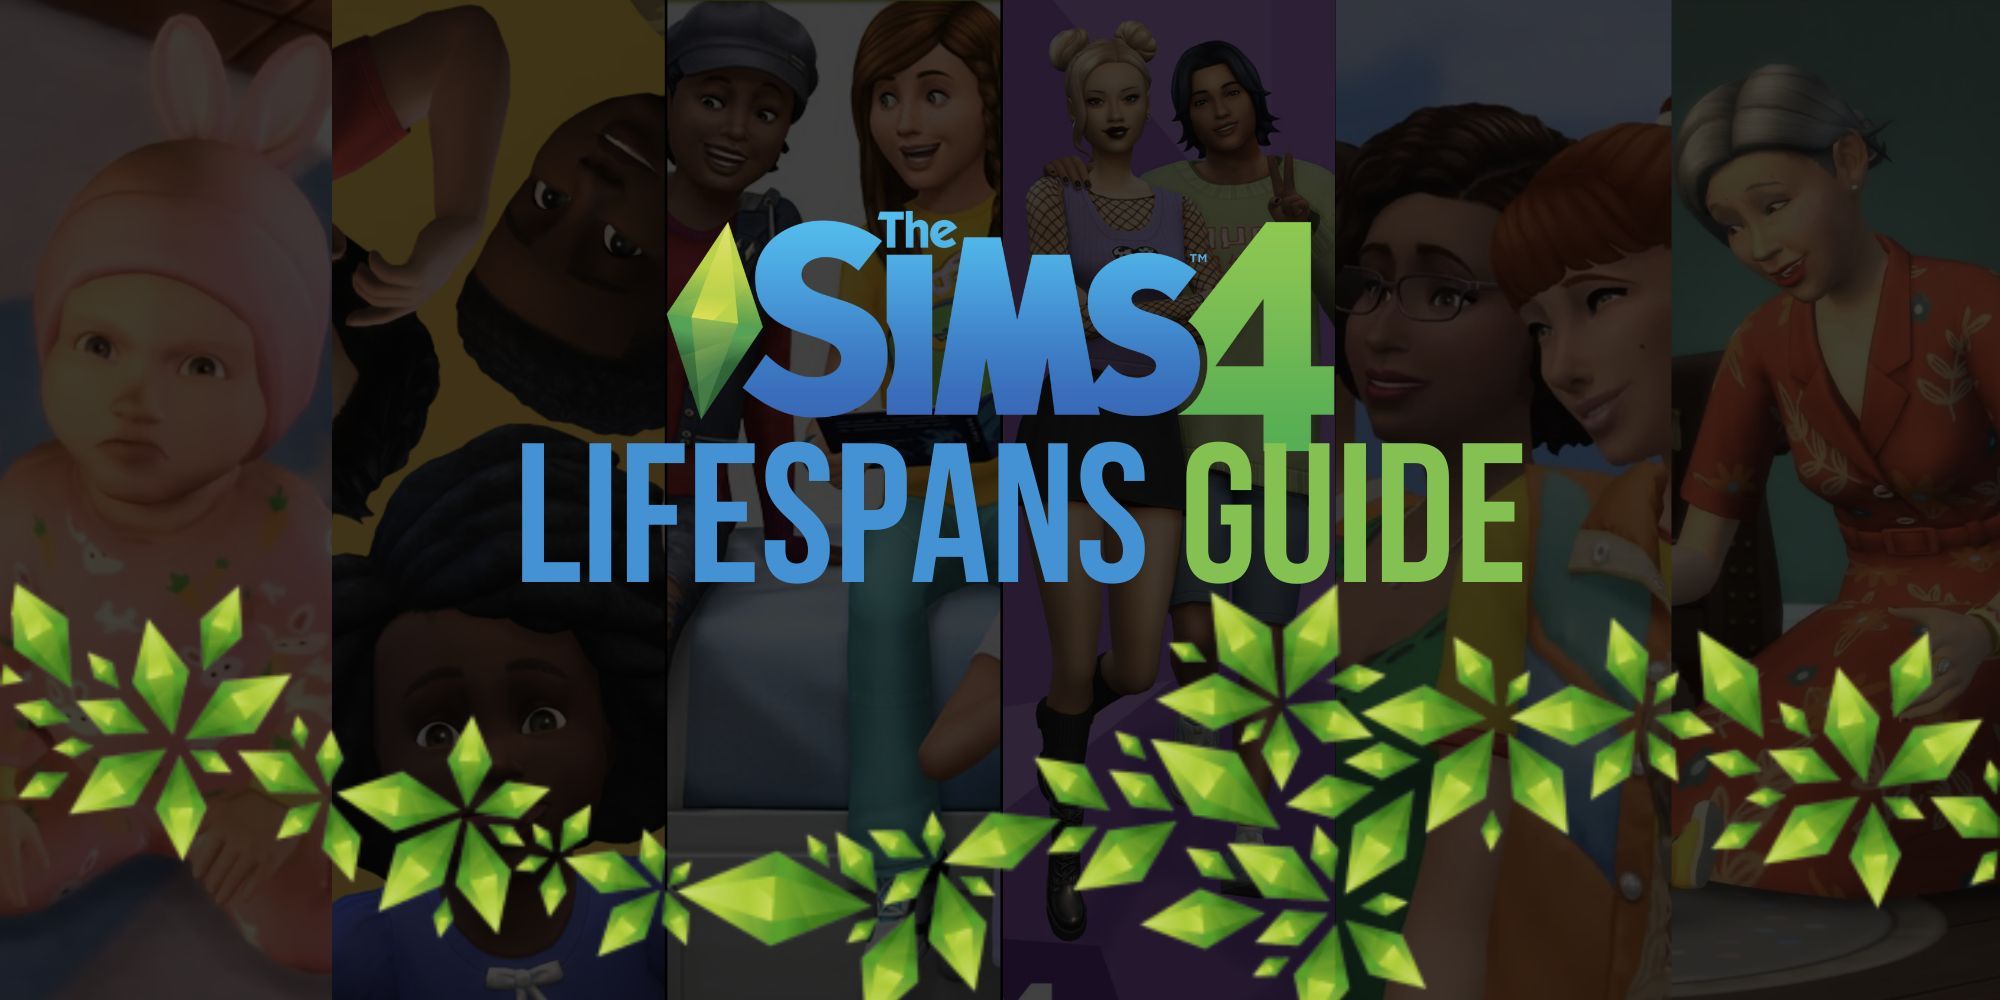 The Sims 4 Lifespans Guide